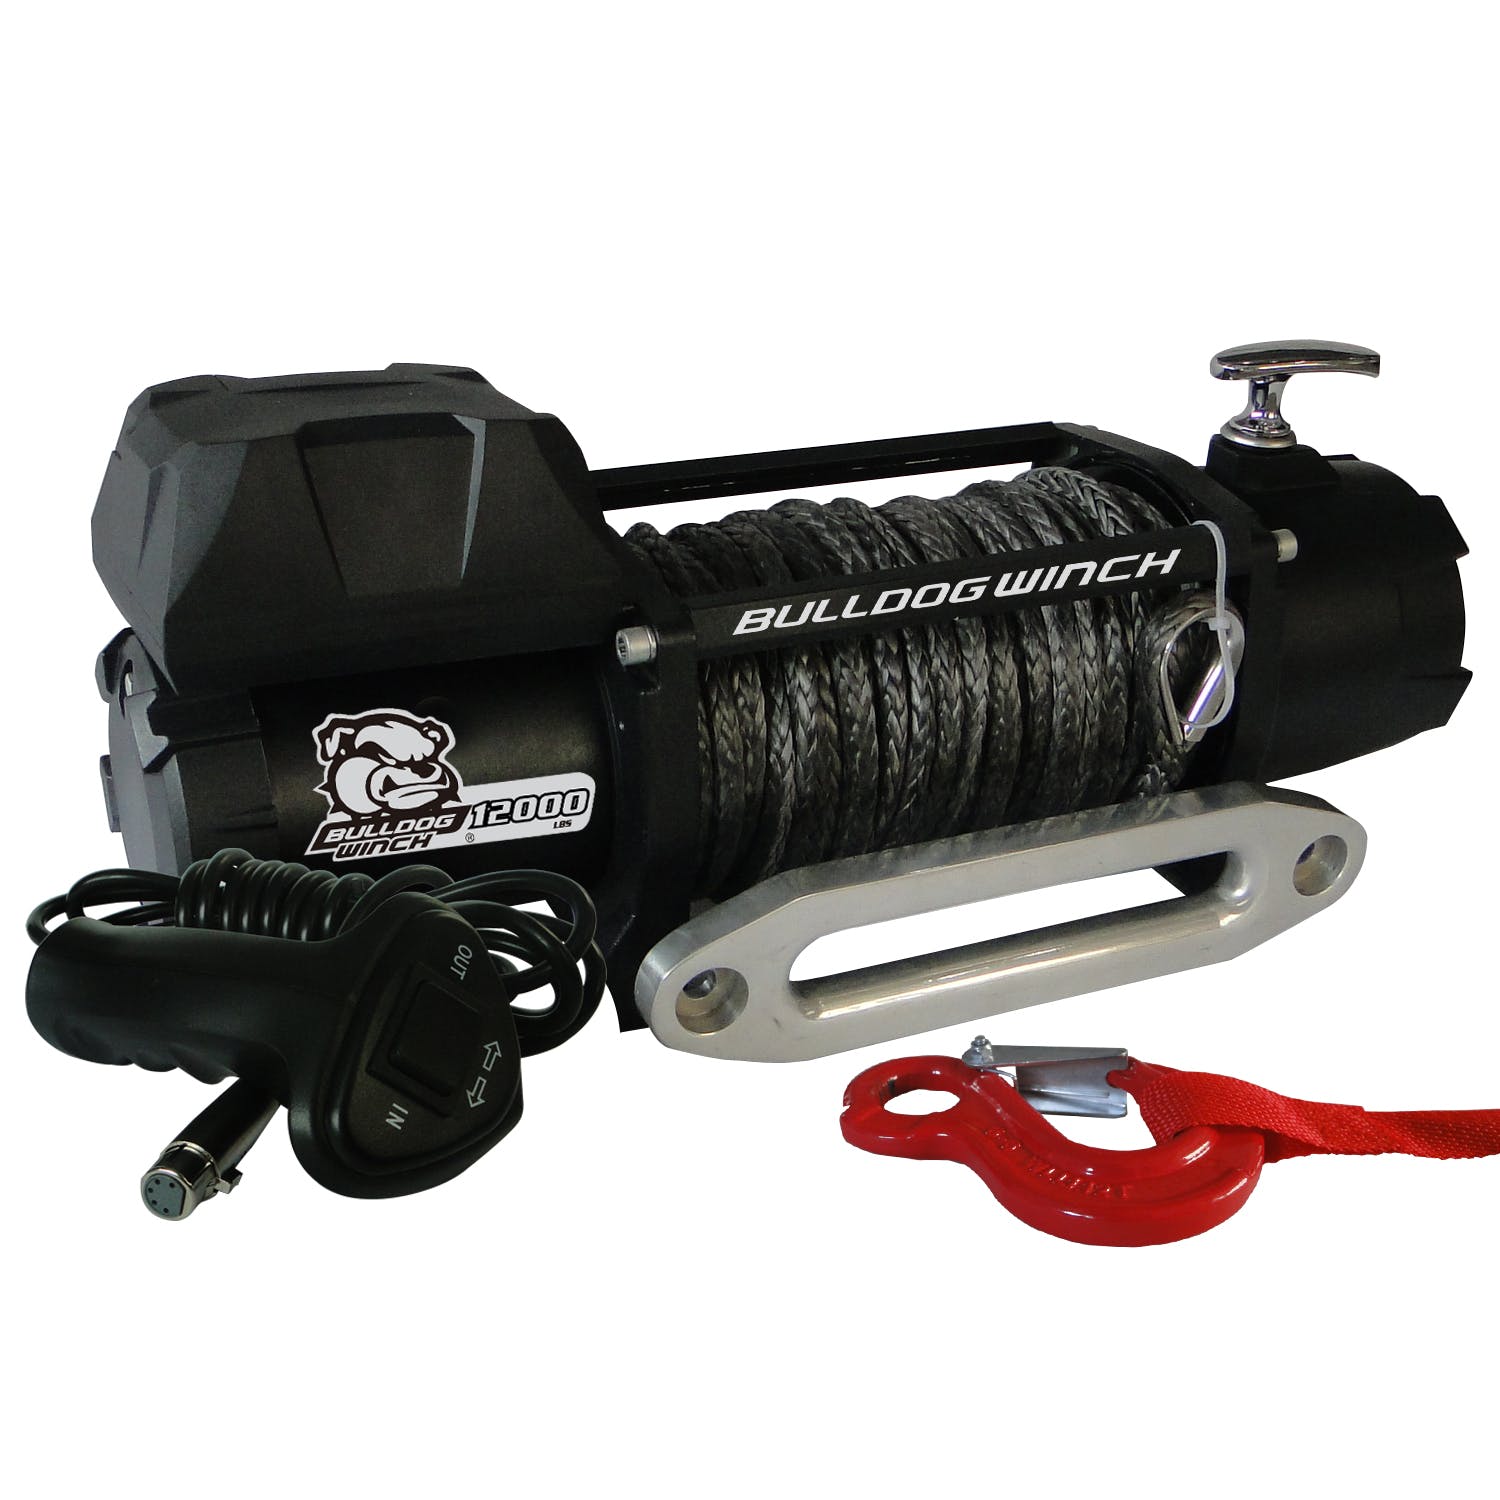 Bulldog Winch Co LLC 10046 12000lb Winch w/6.0hp Series Wound, 100ft Synthetic Rope, Aluminum Frld